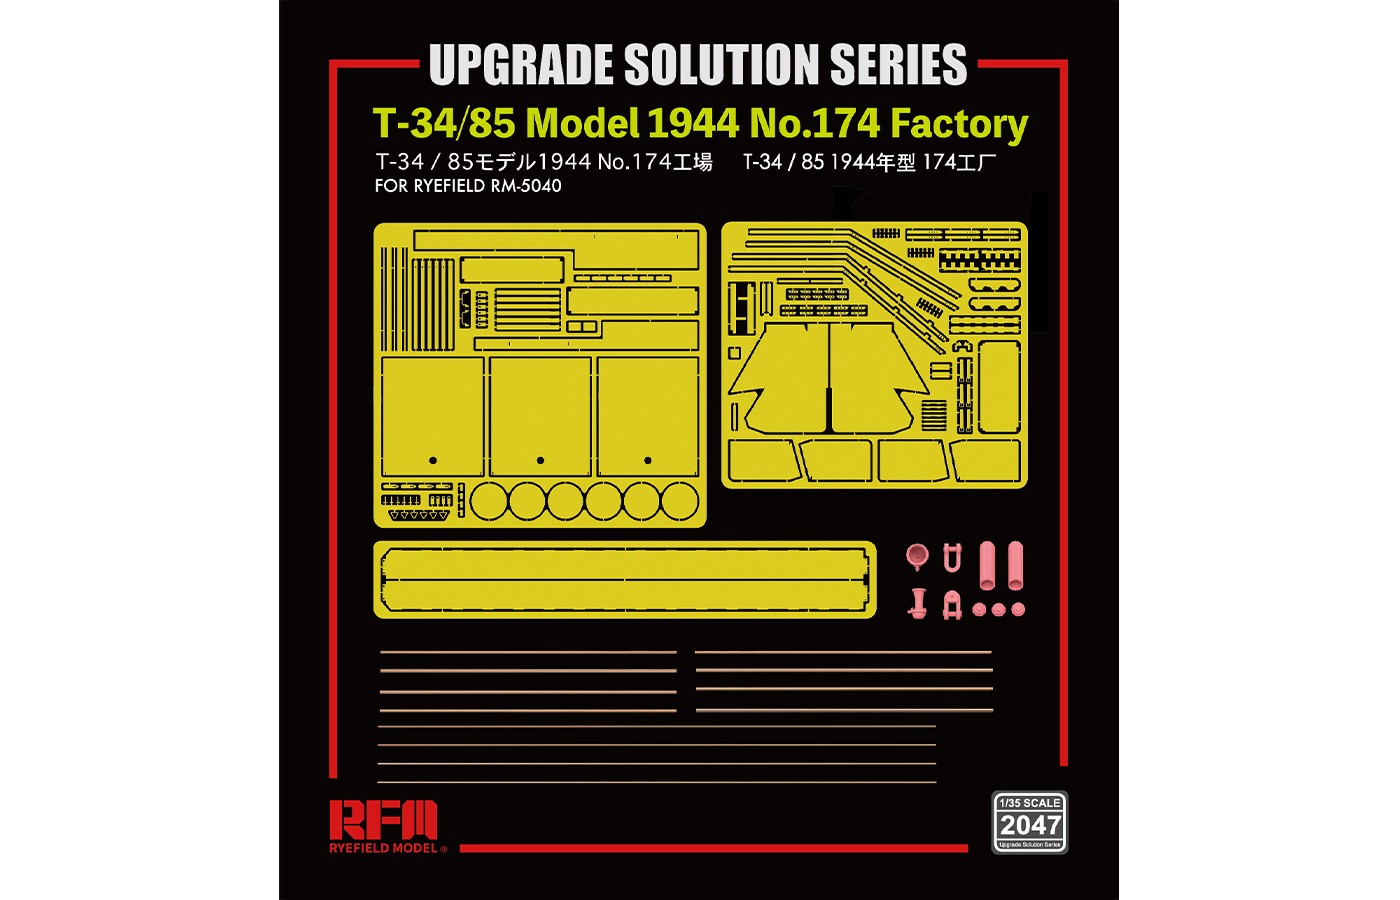 T-34/85 Model 1944 No.174 Factory Upgrade Solution Series